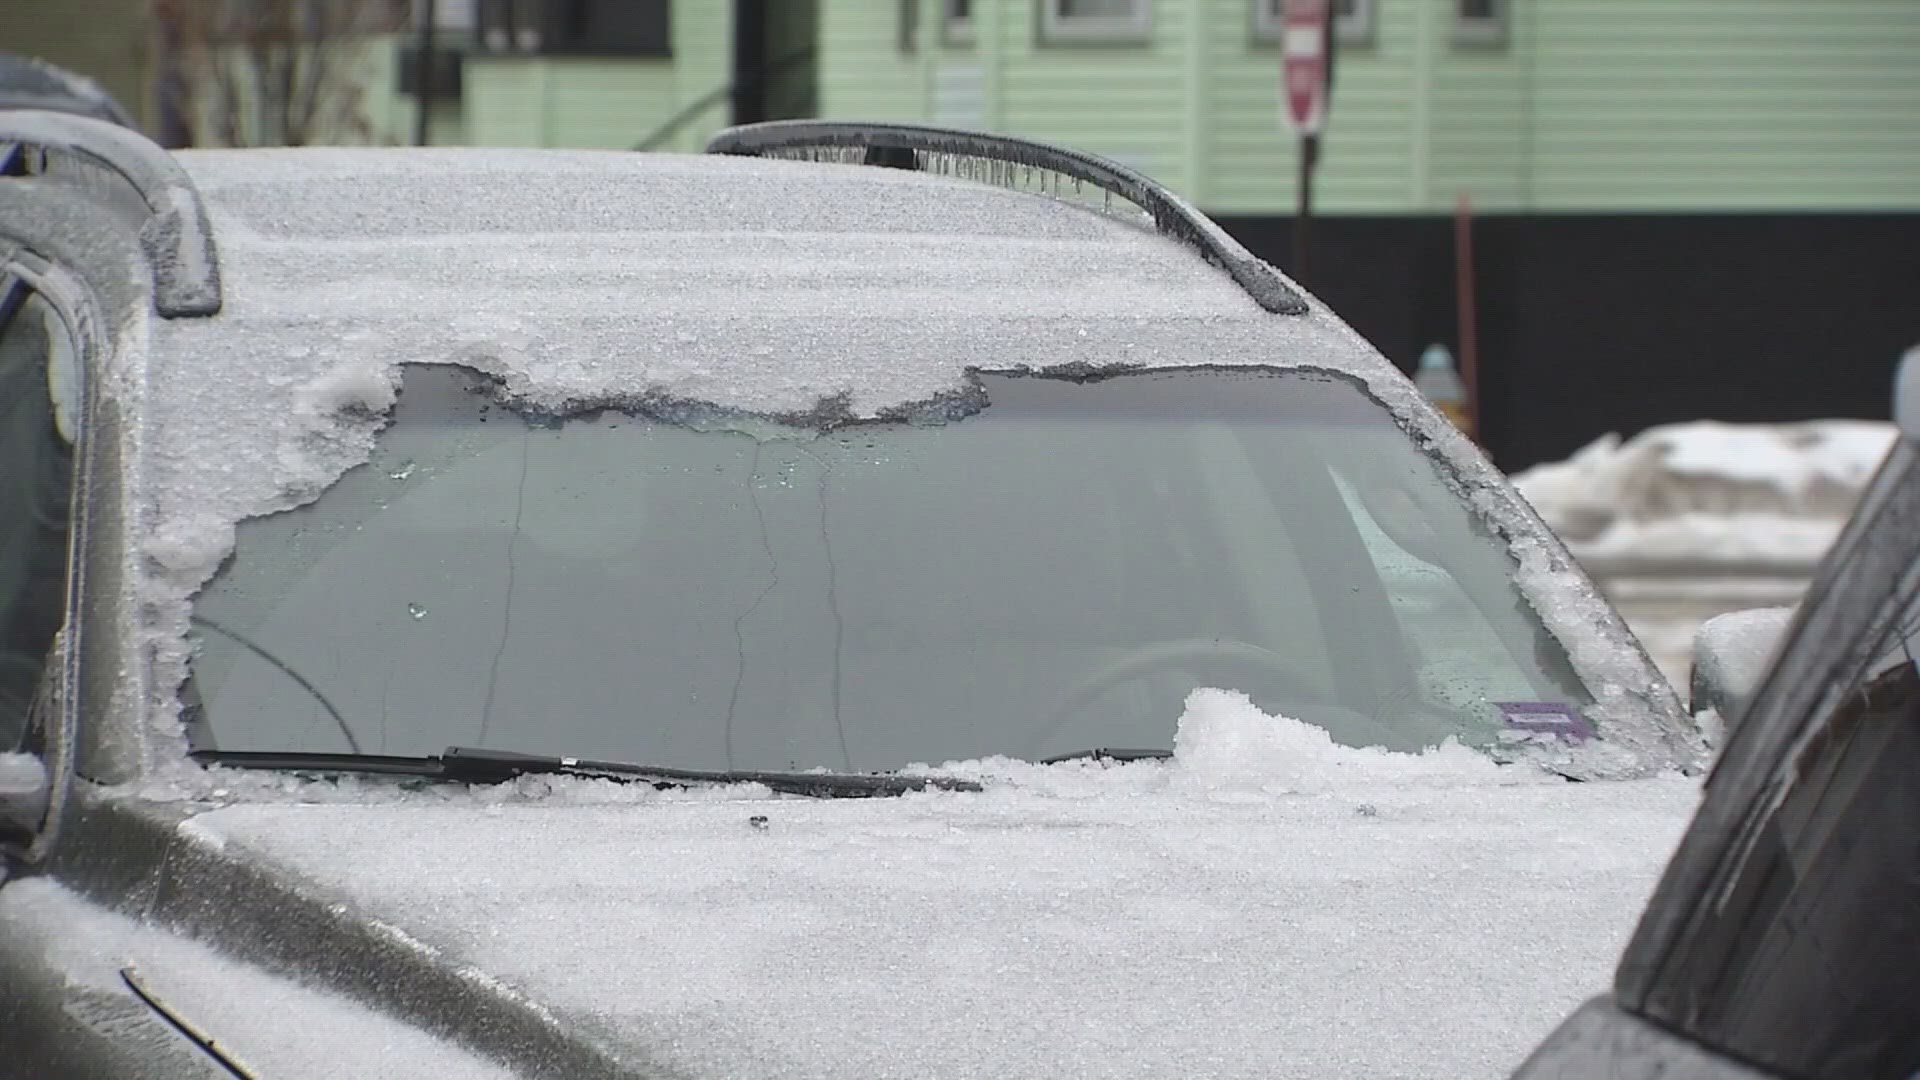 The Maine Legislature's transportation committee voted to amend a bill that would require drivers to clear snow off their cars. Commercial truckers are now exempt.